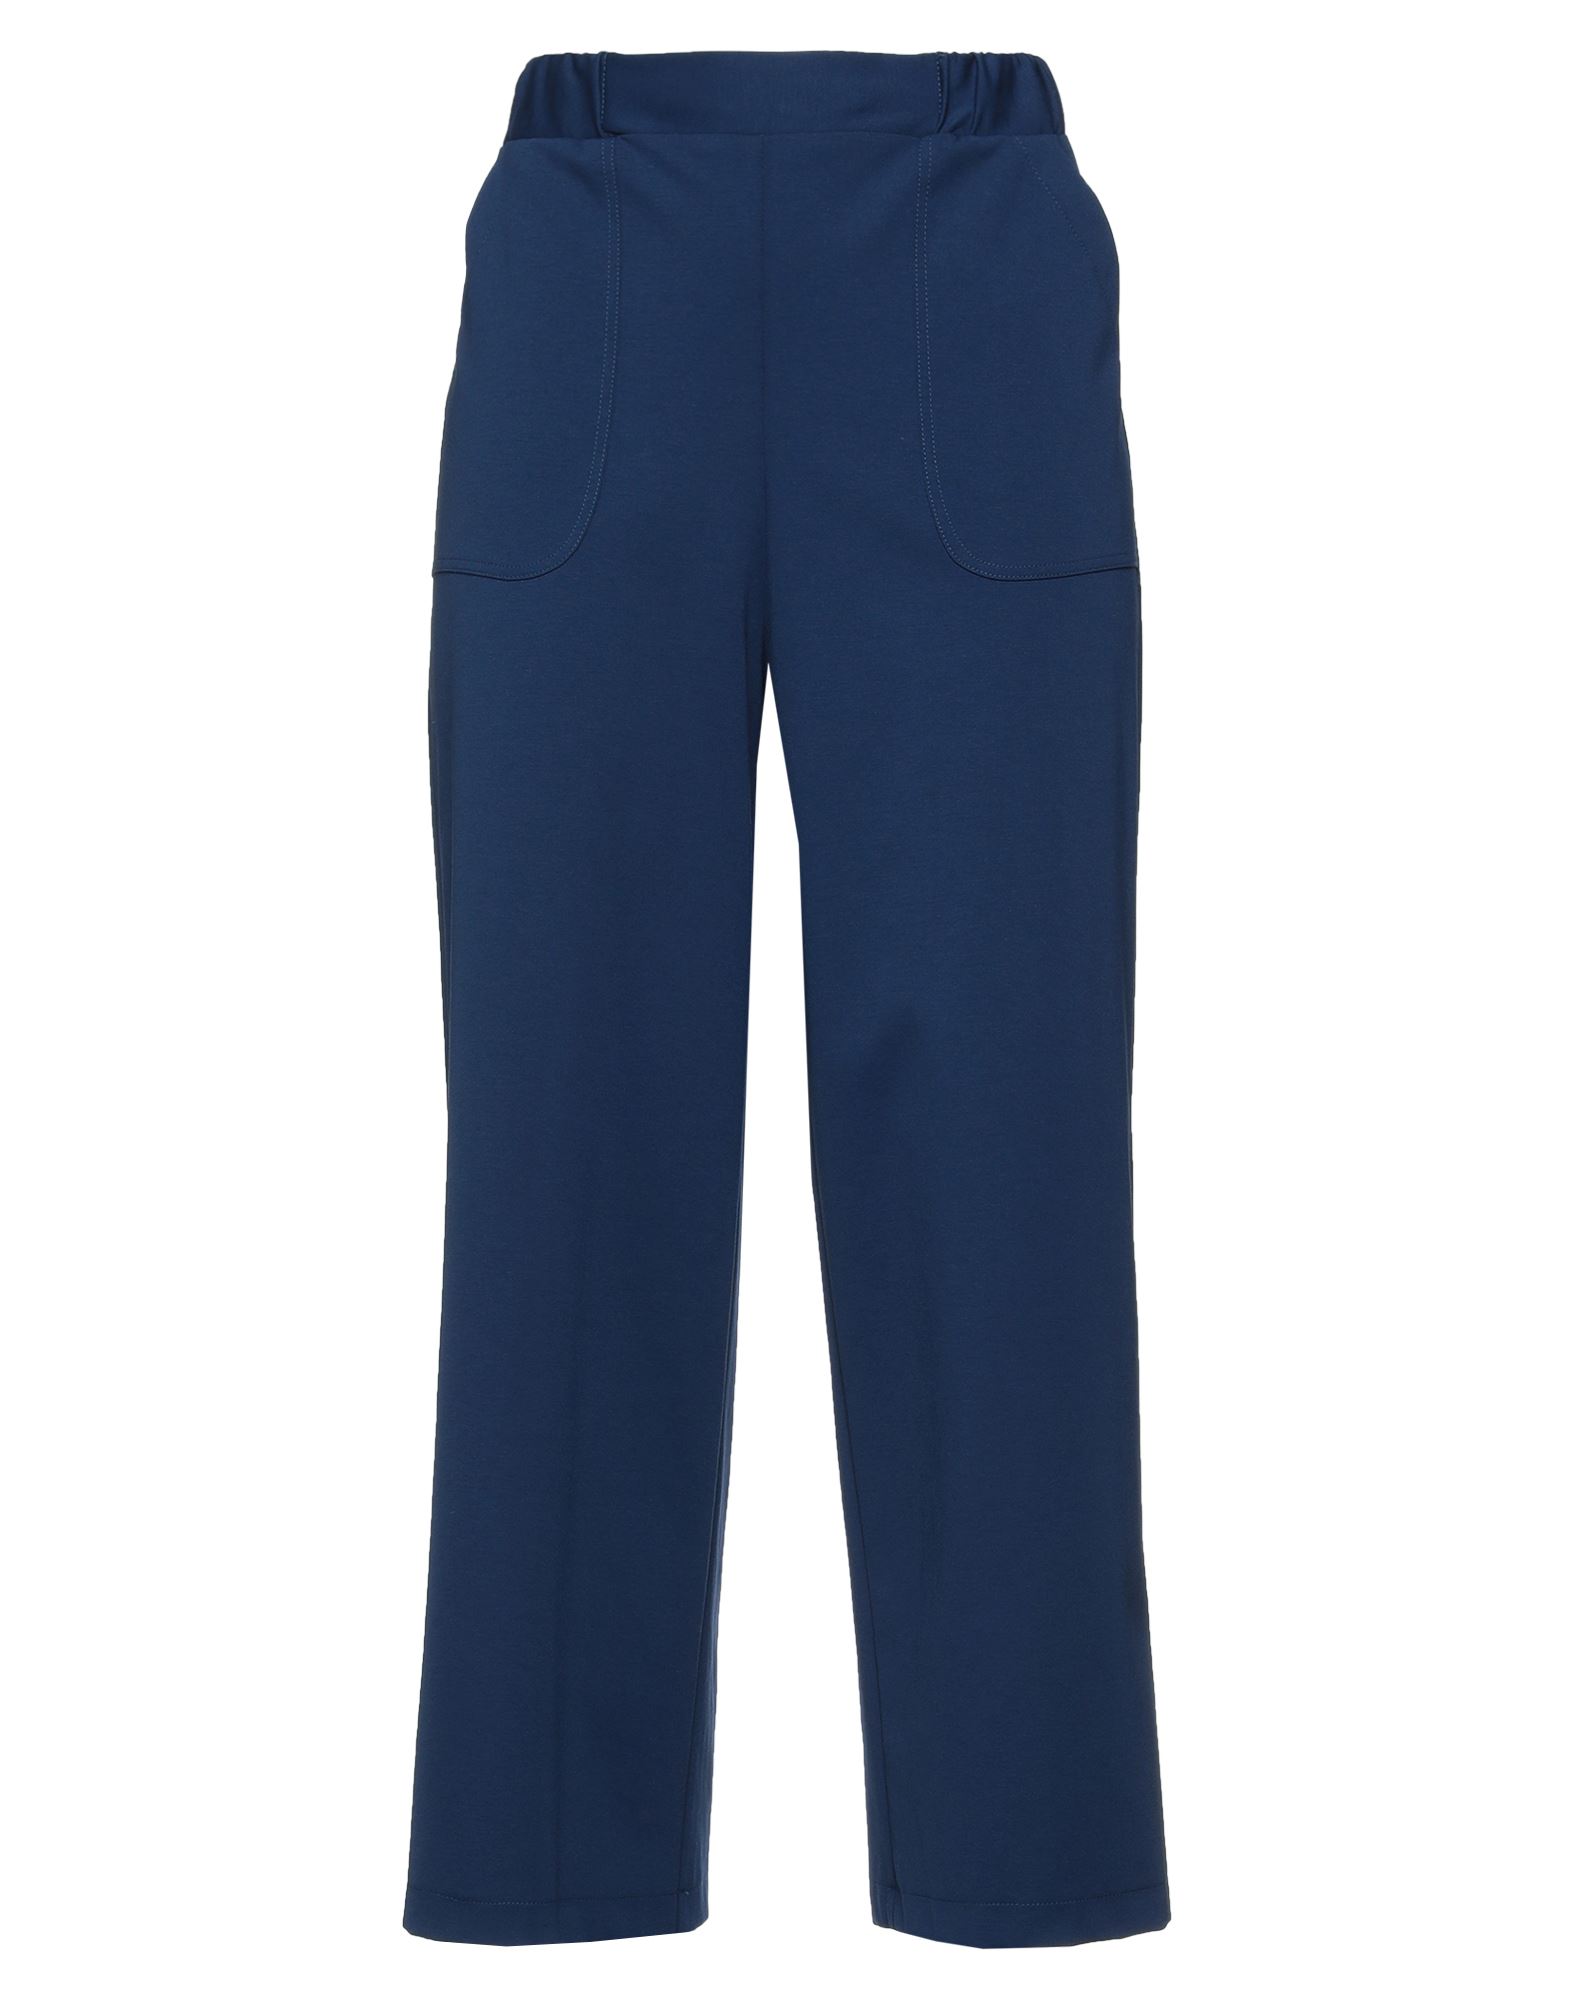 Shirtaporter Pants In Blue